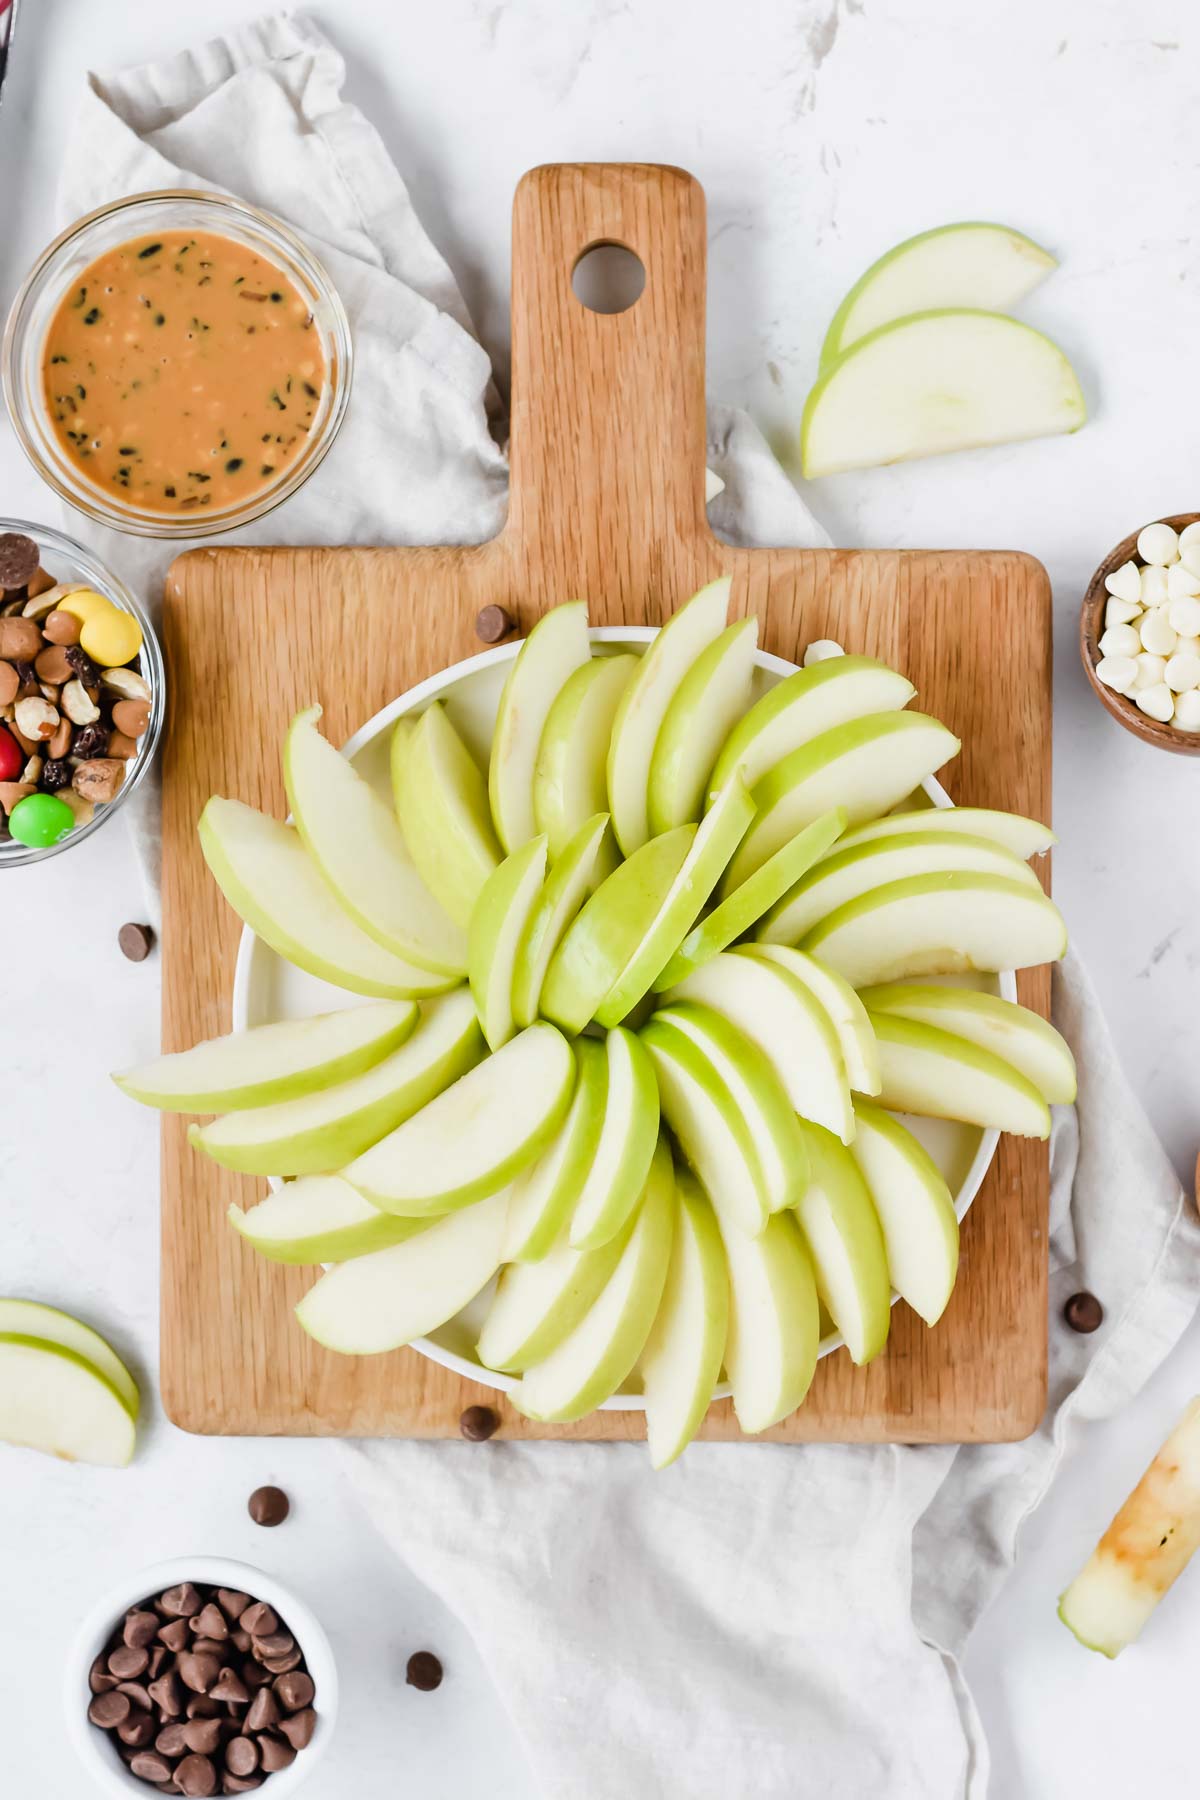 green apple sliced finely and layered in a spiral on wooden cutting board.